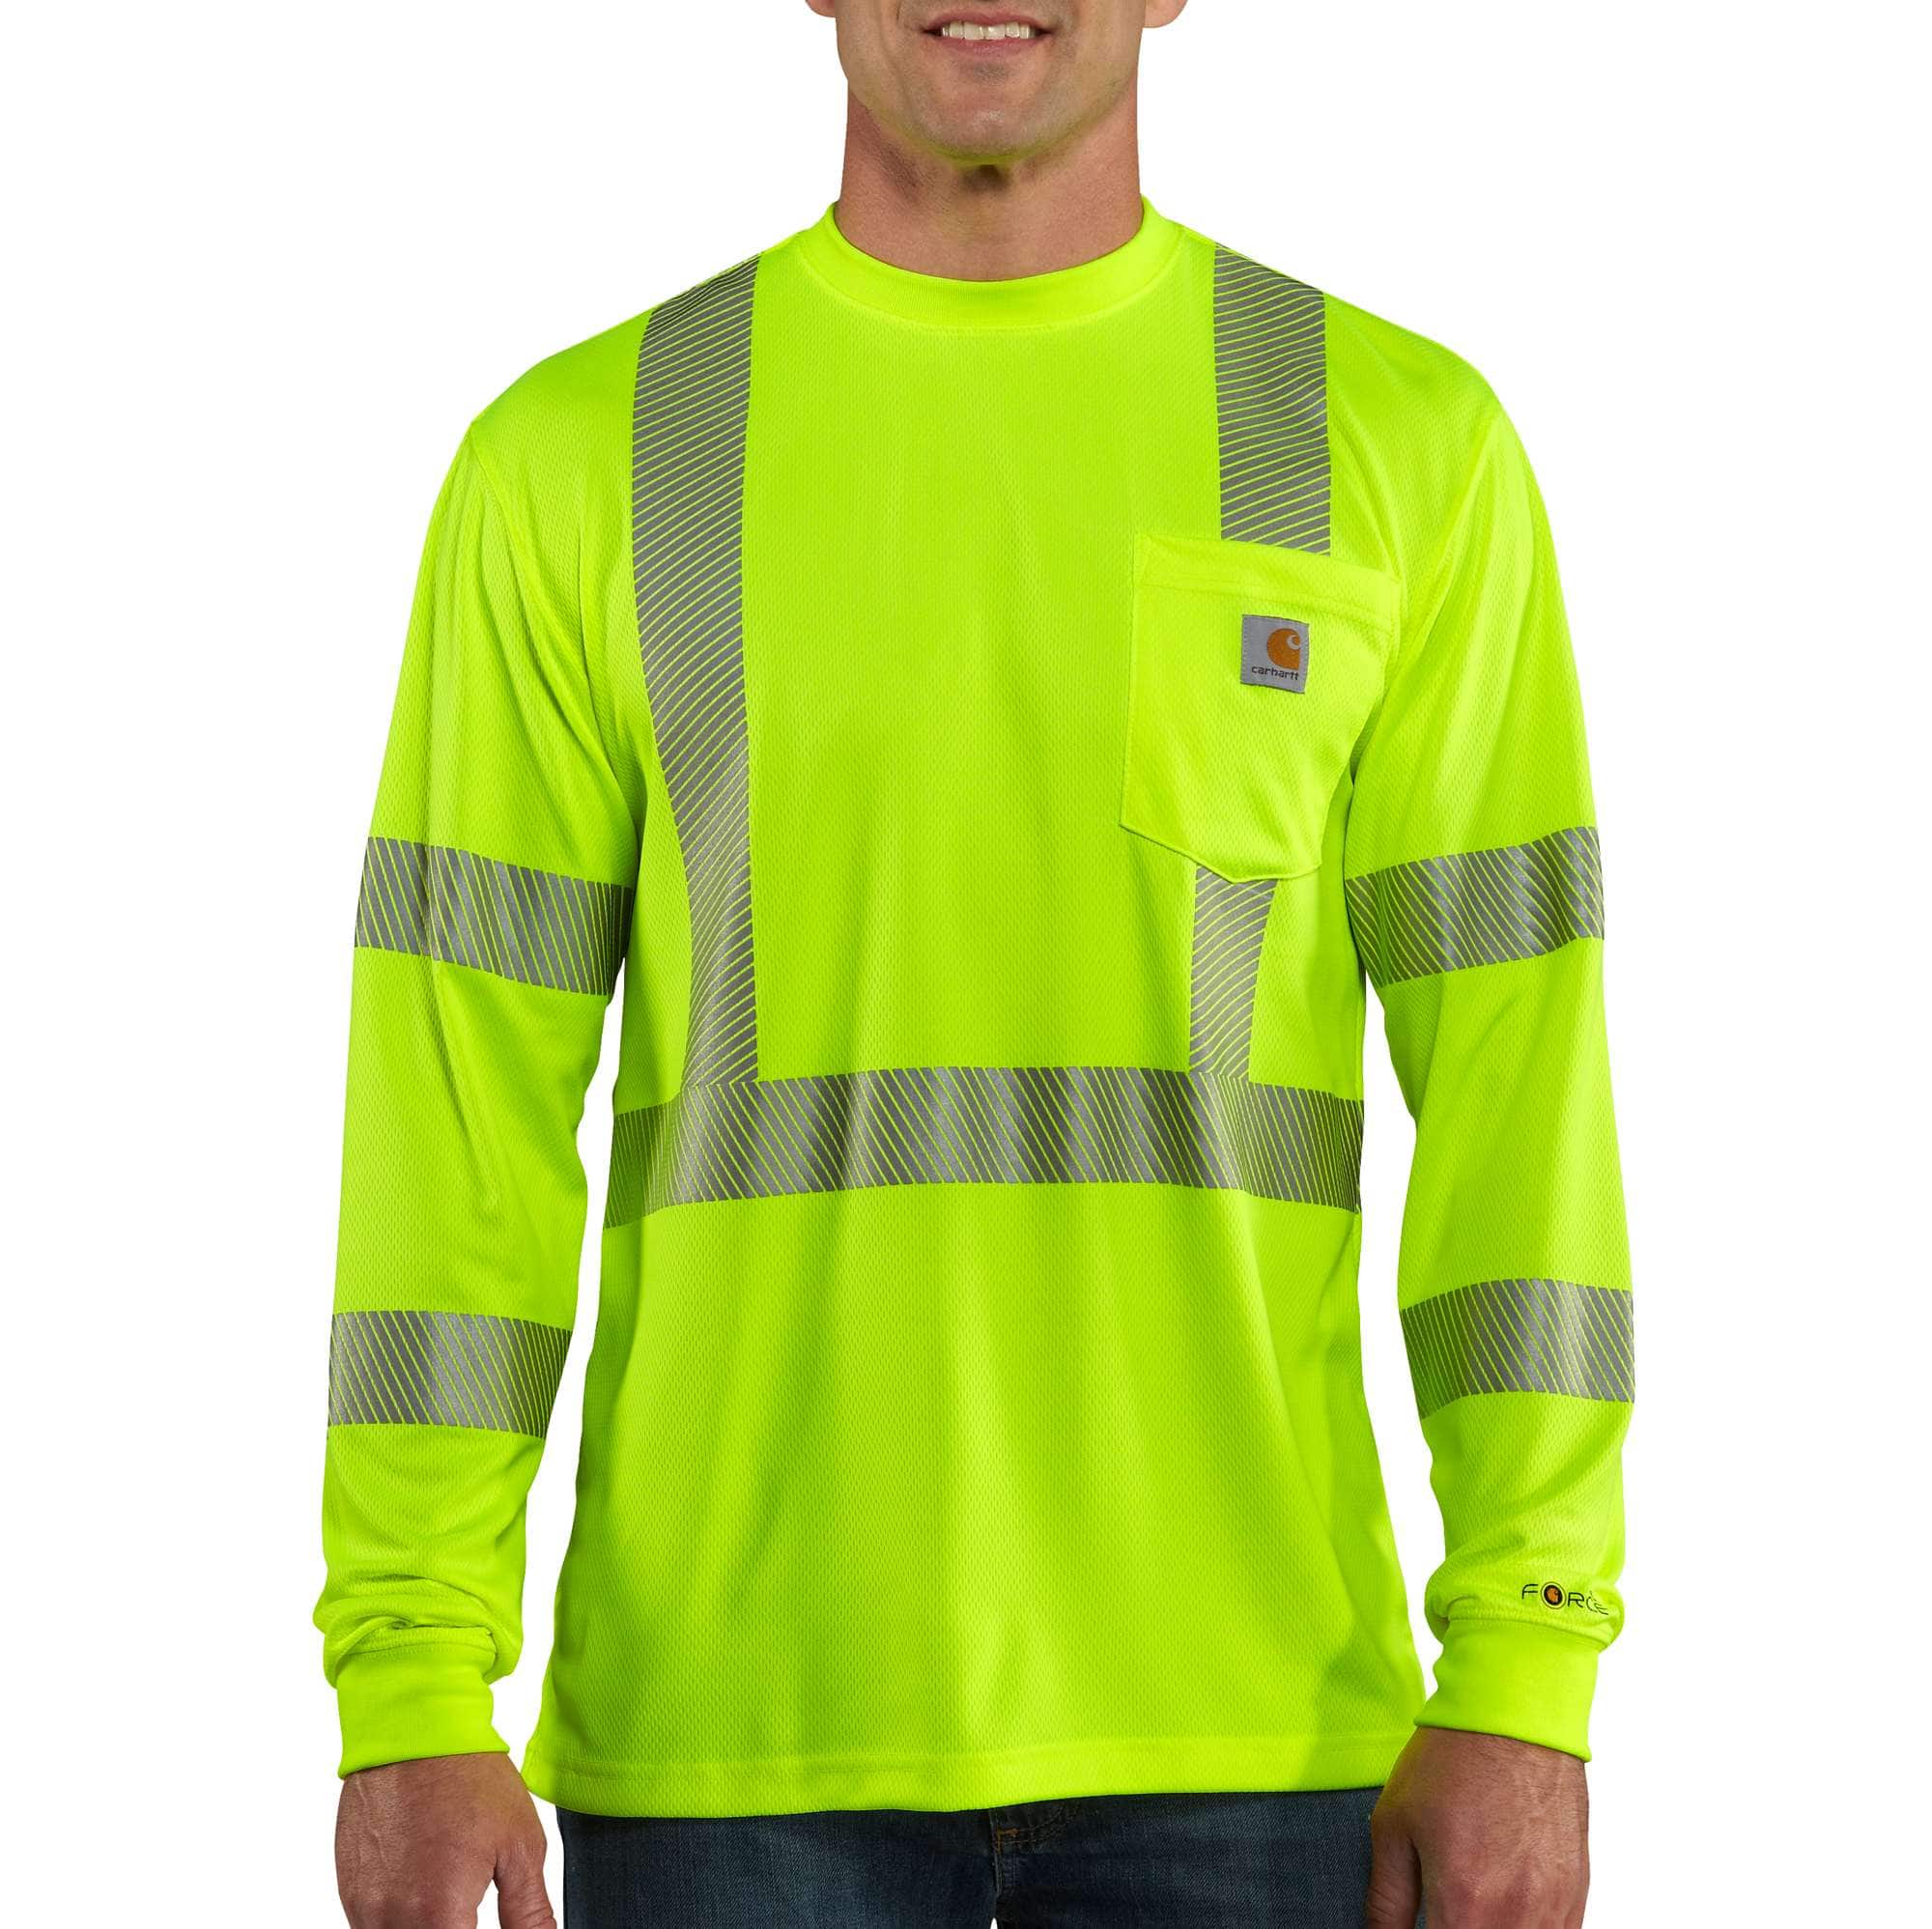 Custom Construction Apparel and Construction Workwear Clothing